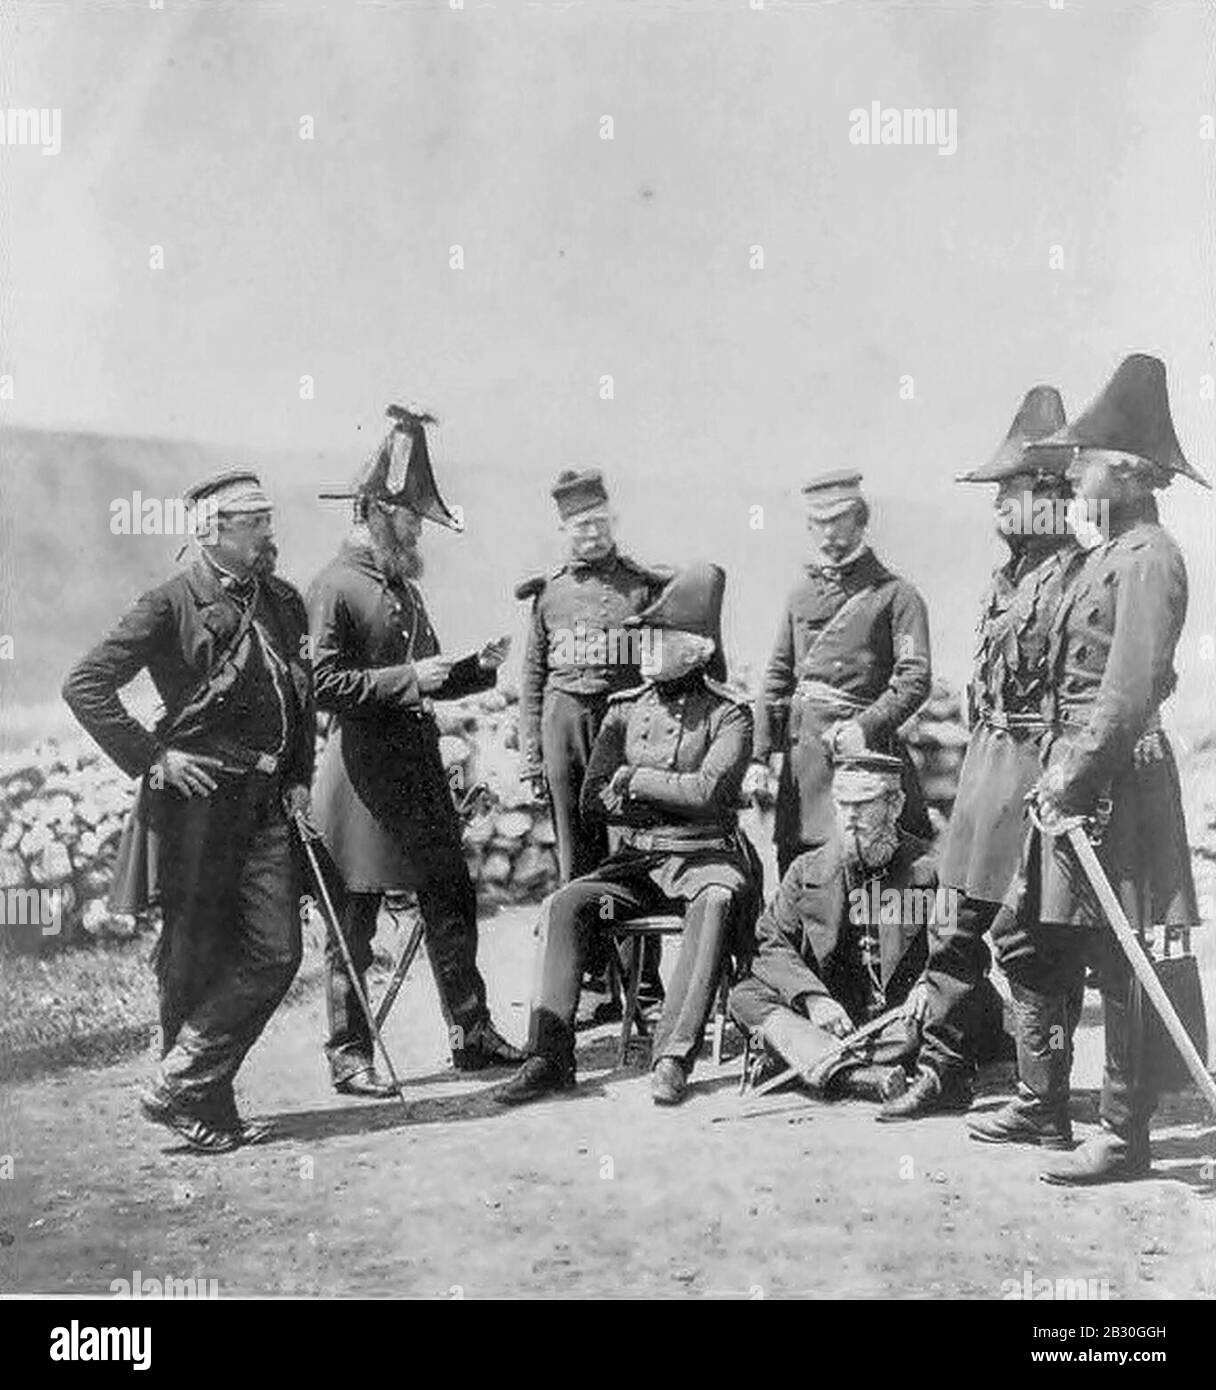 Gen-Brown-and-staff-crimea-1855-by-roger-fenton. Foto Stock